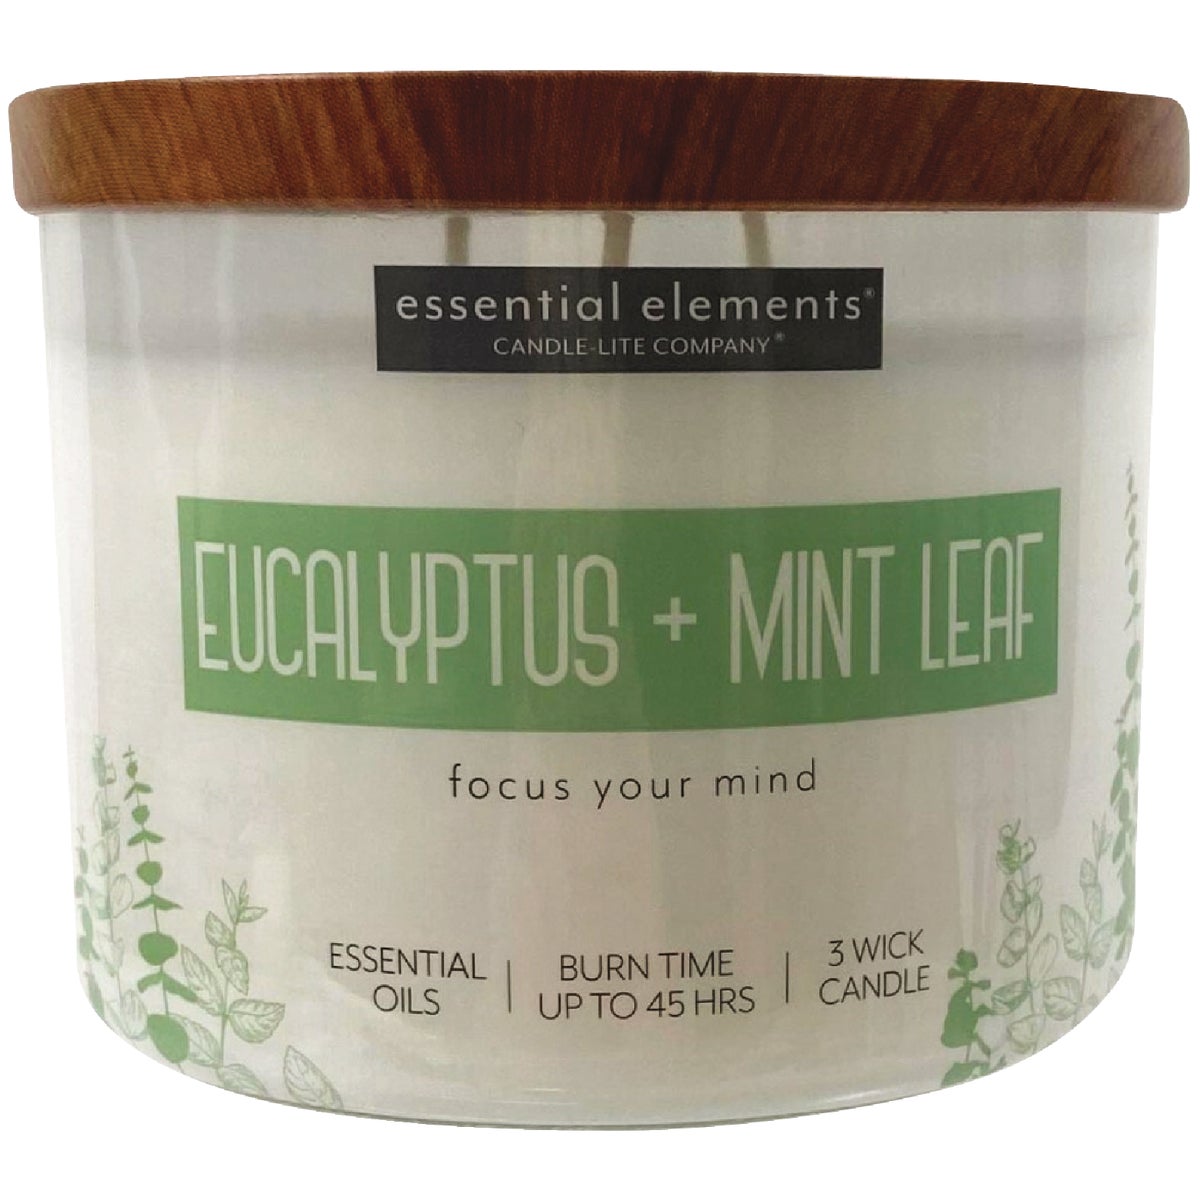 Essential Elements Candle Lite 4574174 Candle-Lite Essential Elements 14.75 Oz. Eucalyptus & Mint Leaf Jar Candle with Lid 4574174